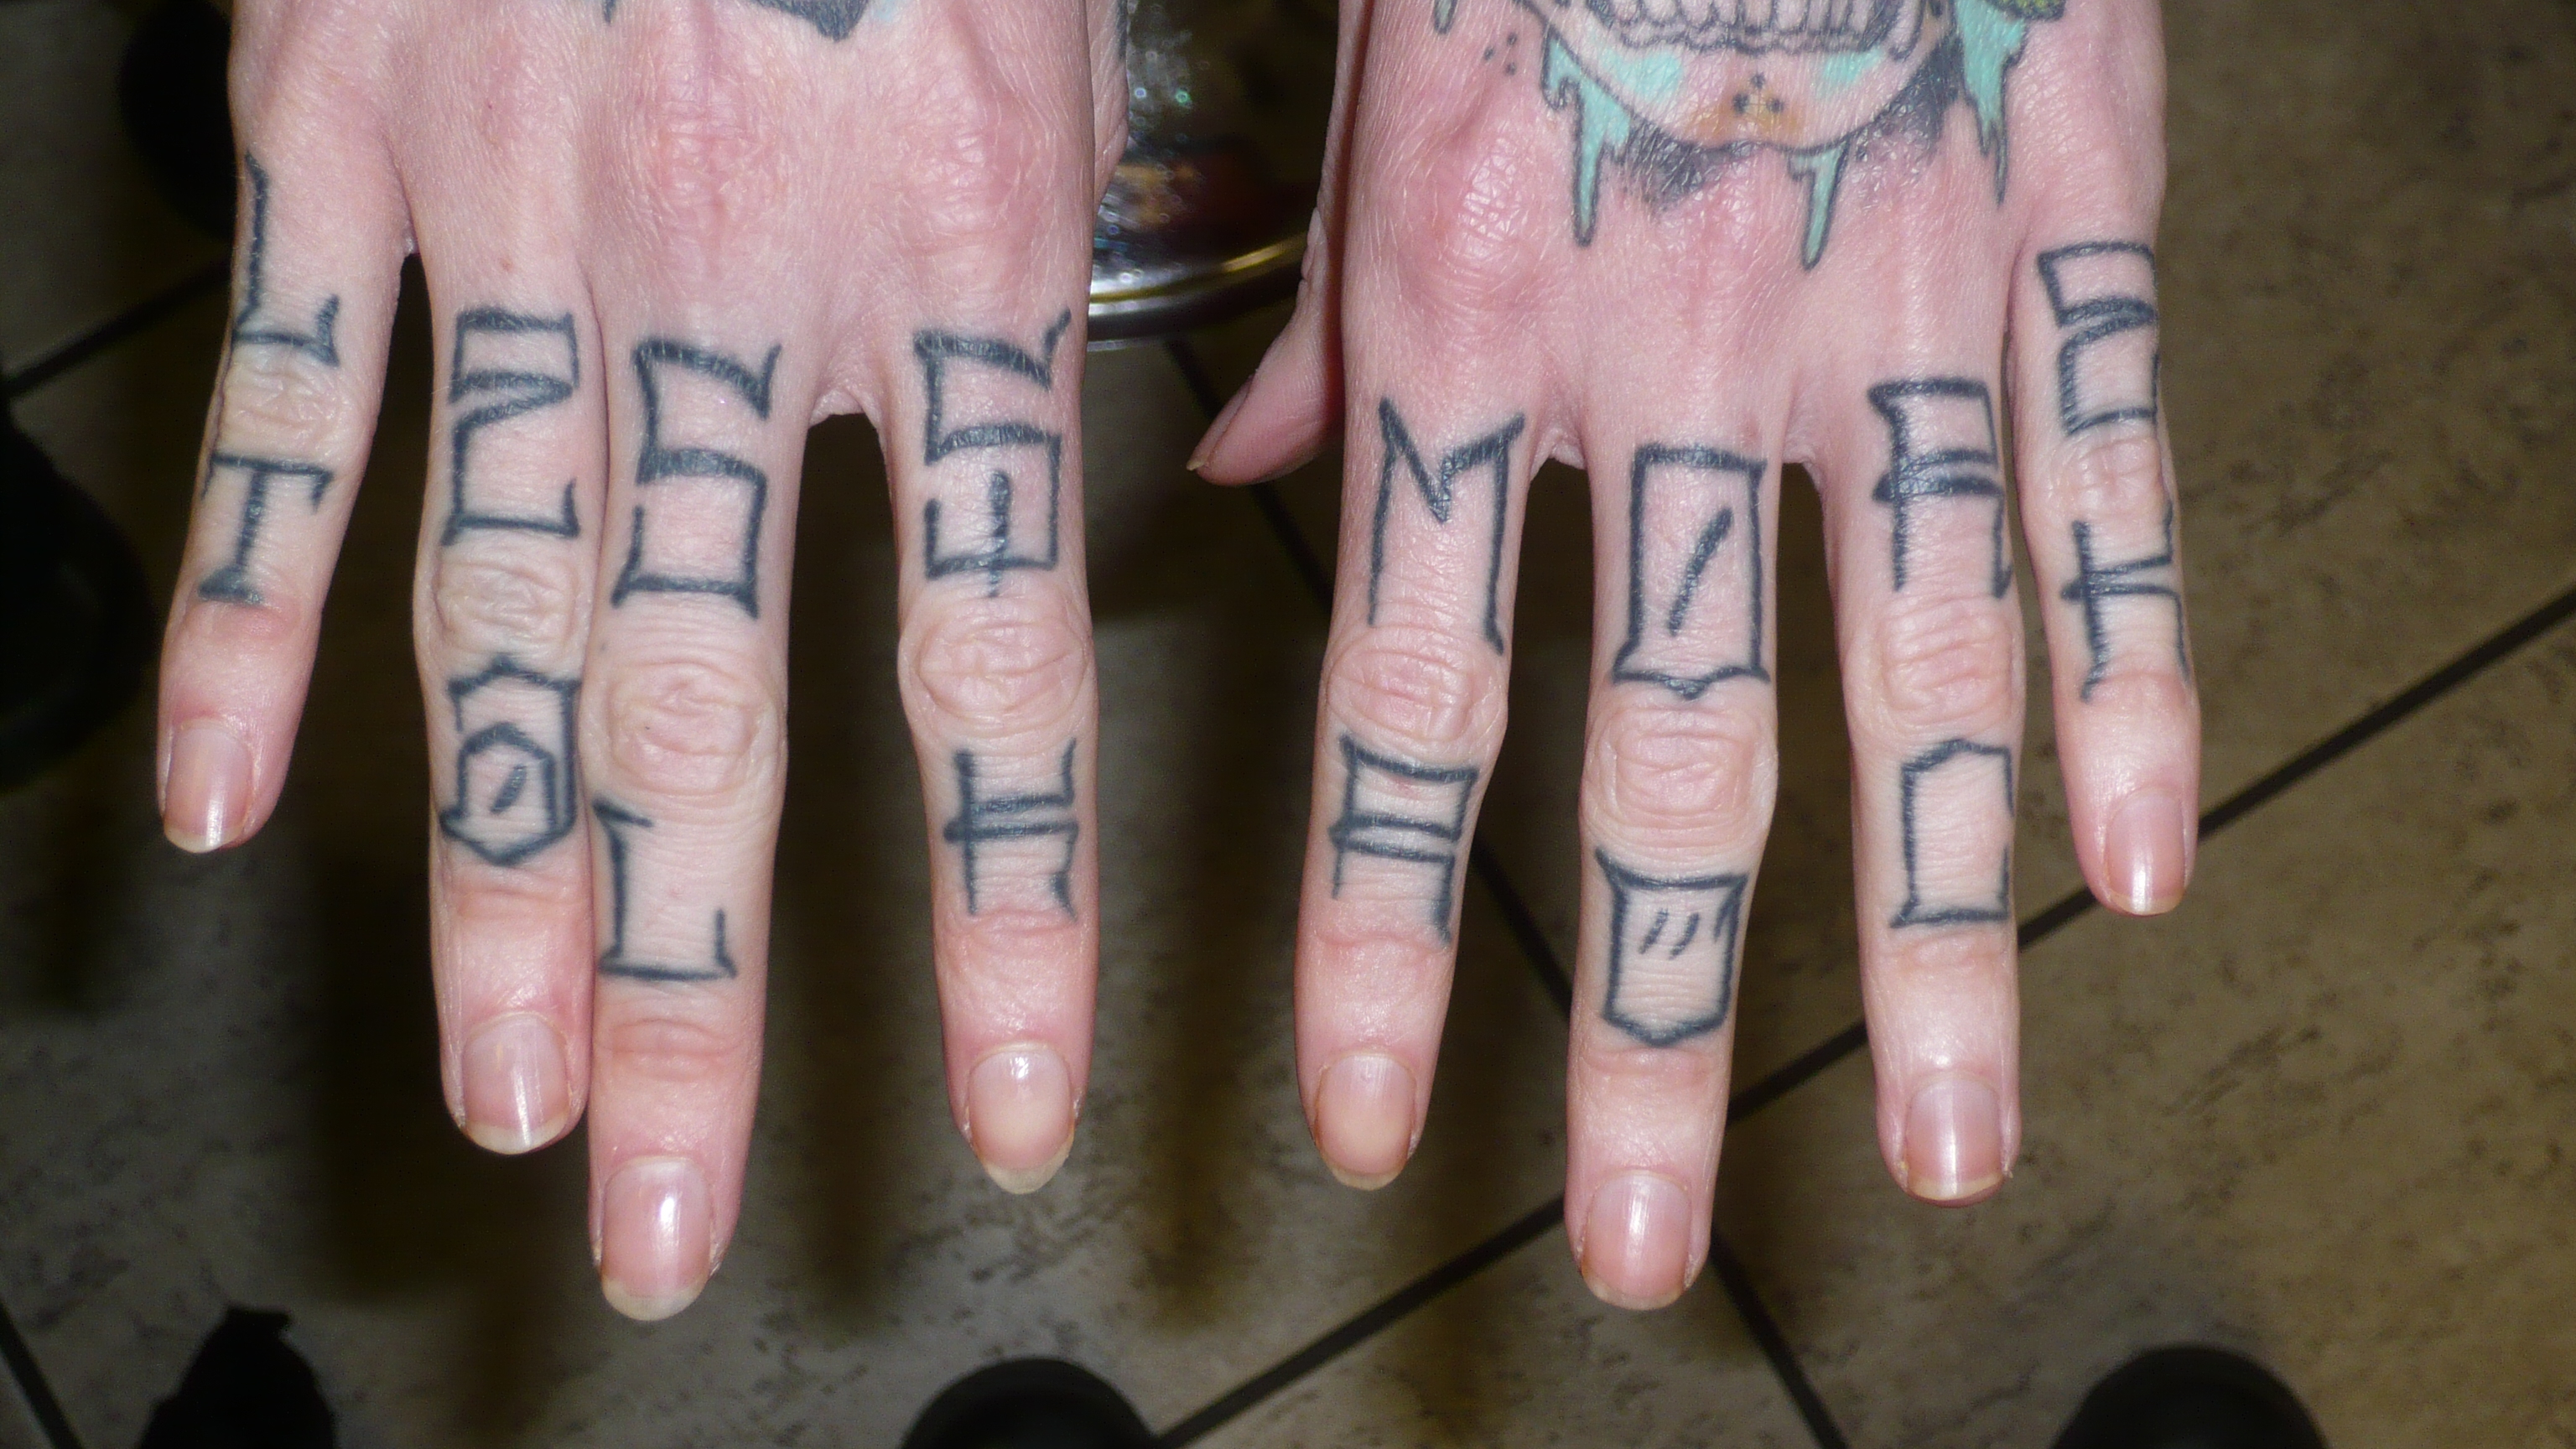 More hand tattoo pictures